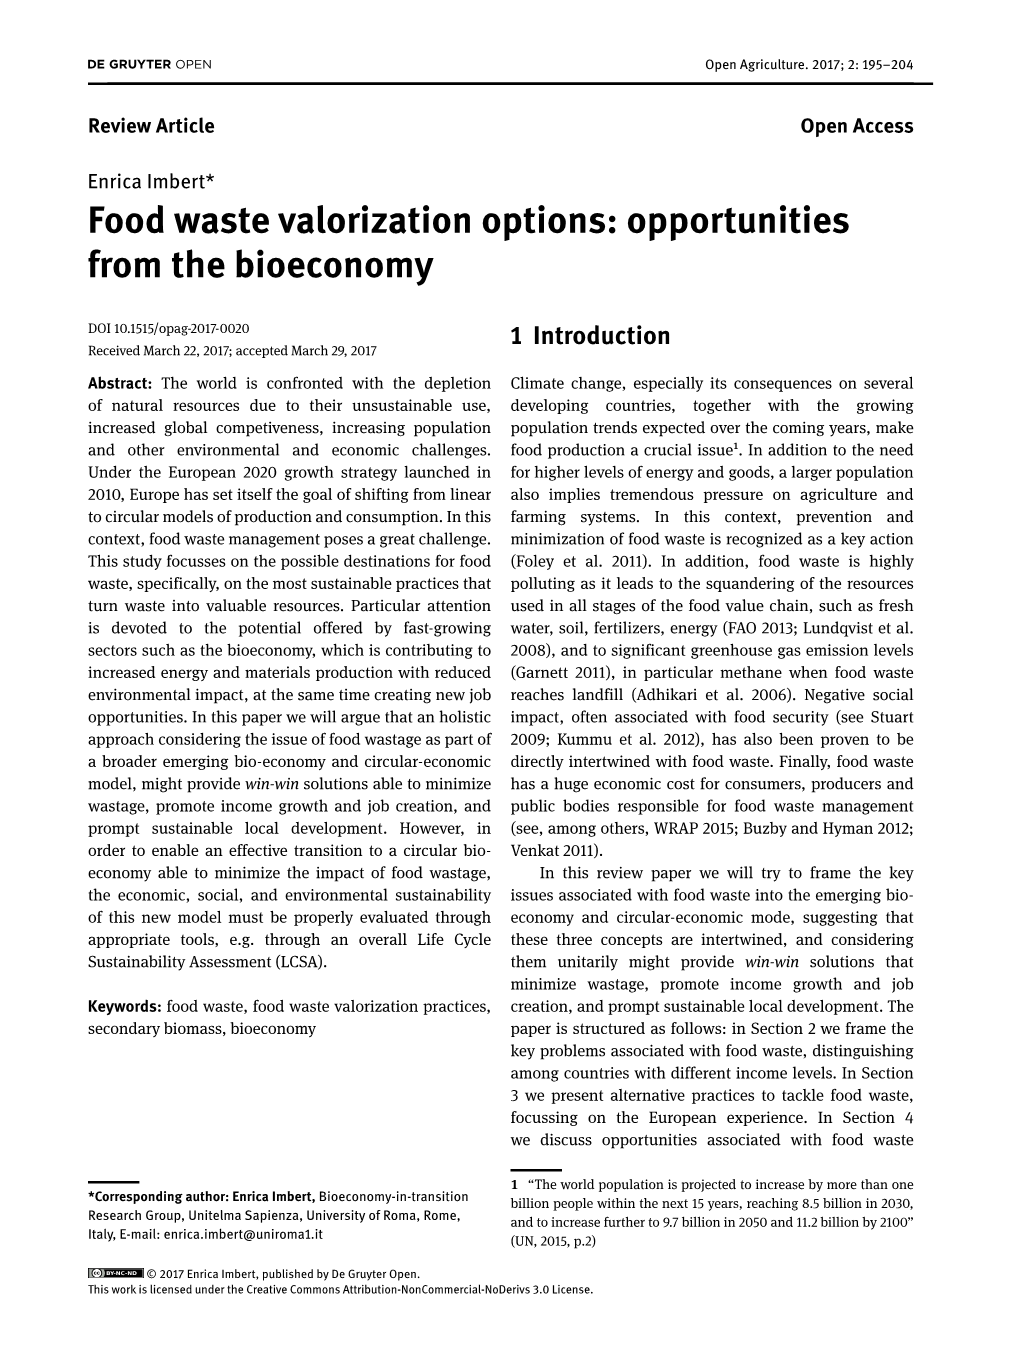 Food Waste Valorization Options: Opportunities from the Bioeconomy